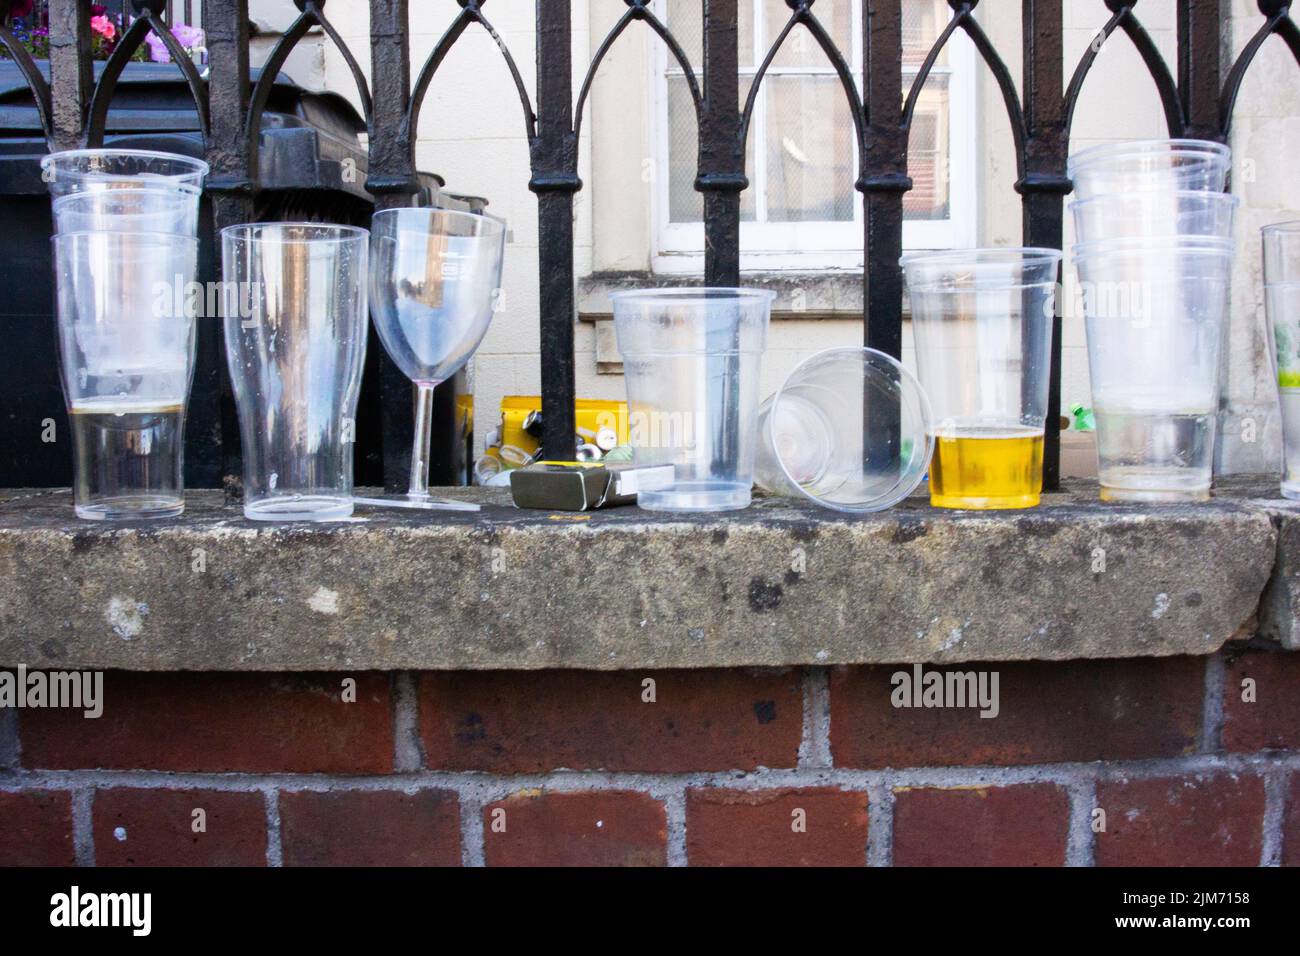 A closeup of plastic and glass cups on the brick wall surface against the metal railings. Stock Photo